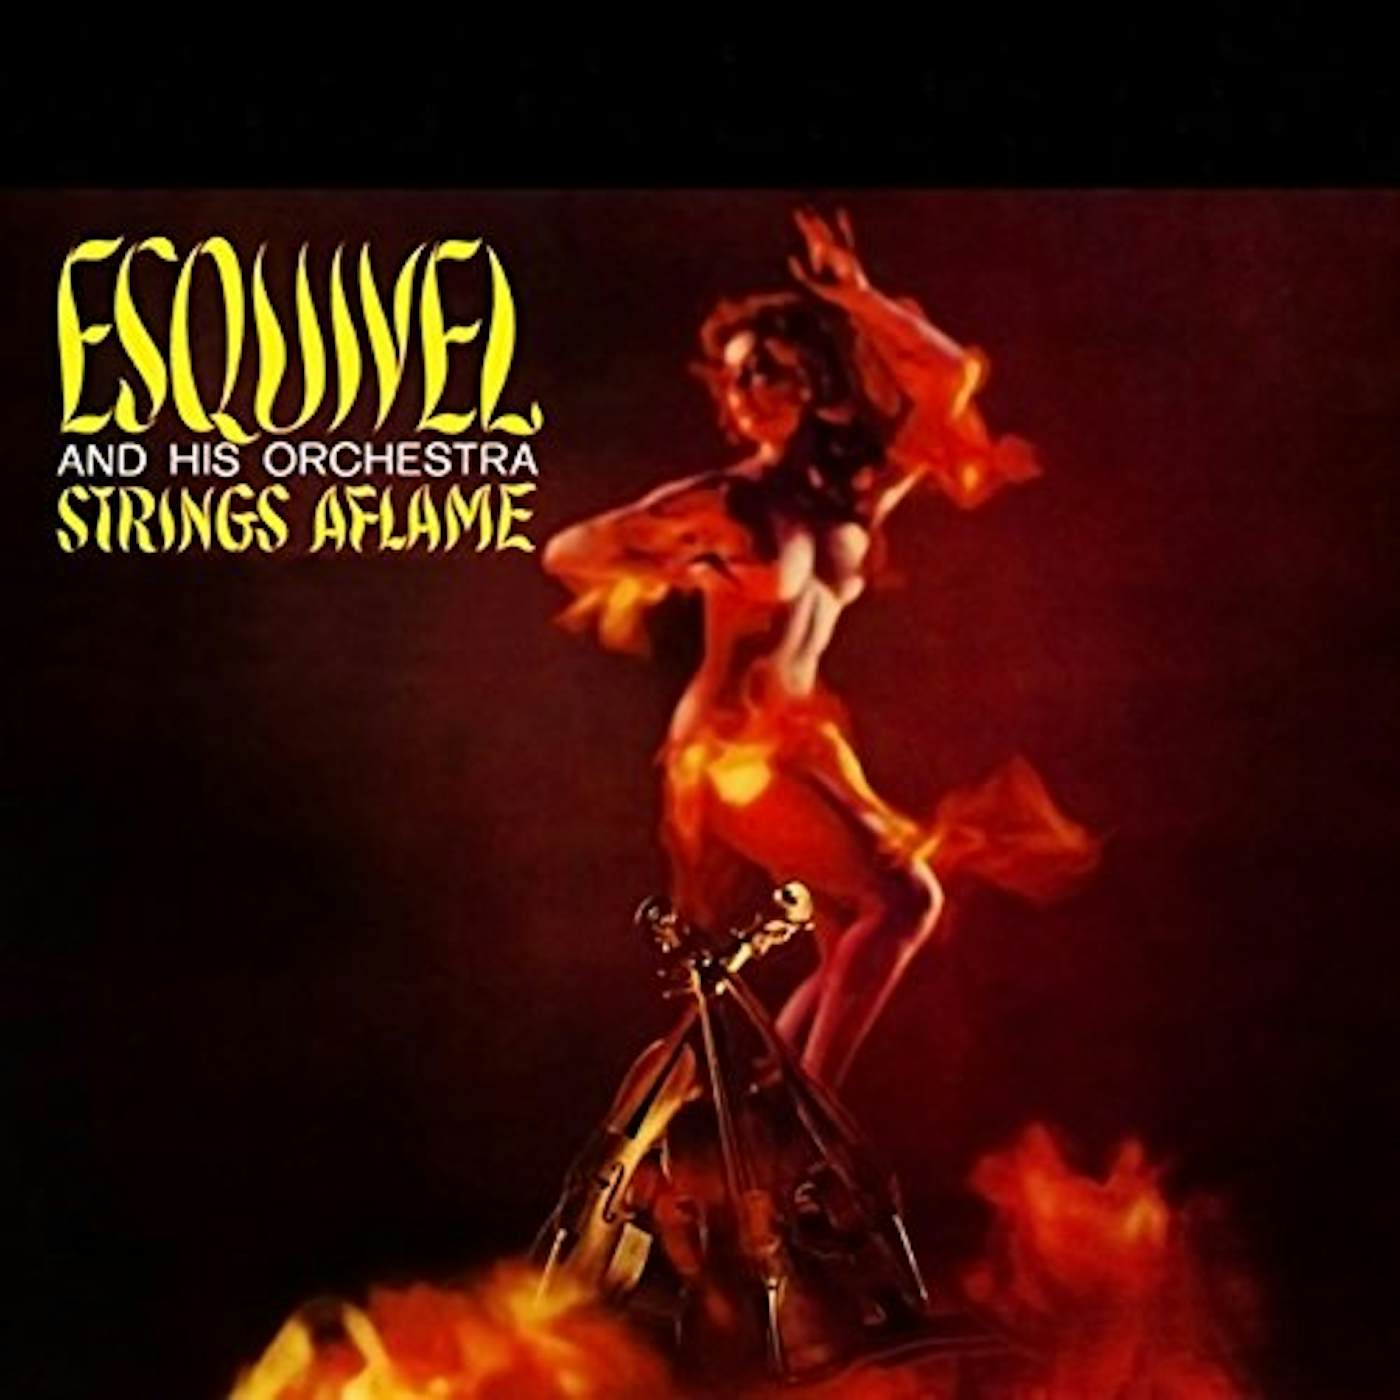 Esquivel & His Orchestra STRINGS AFLAME (BONUS TRACK) Vinyl Record - Limited Edition, 180 Gram Pressing, Collector's Edition